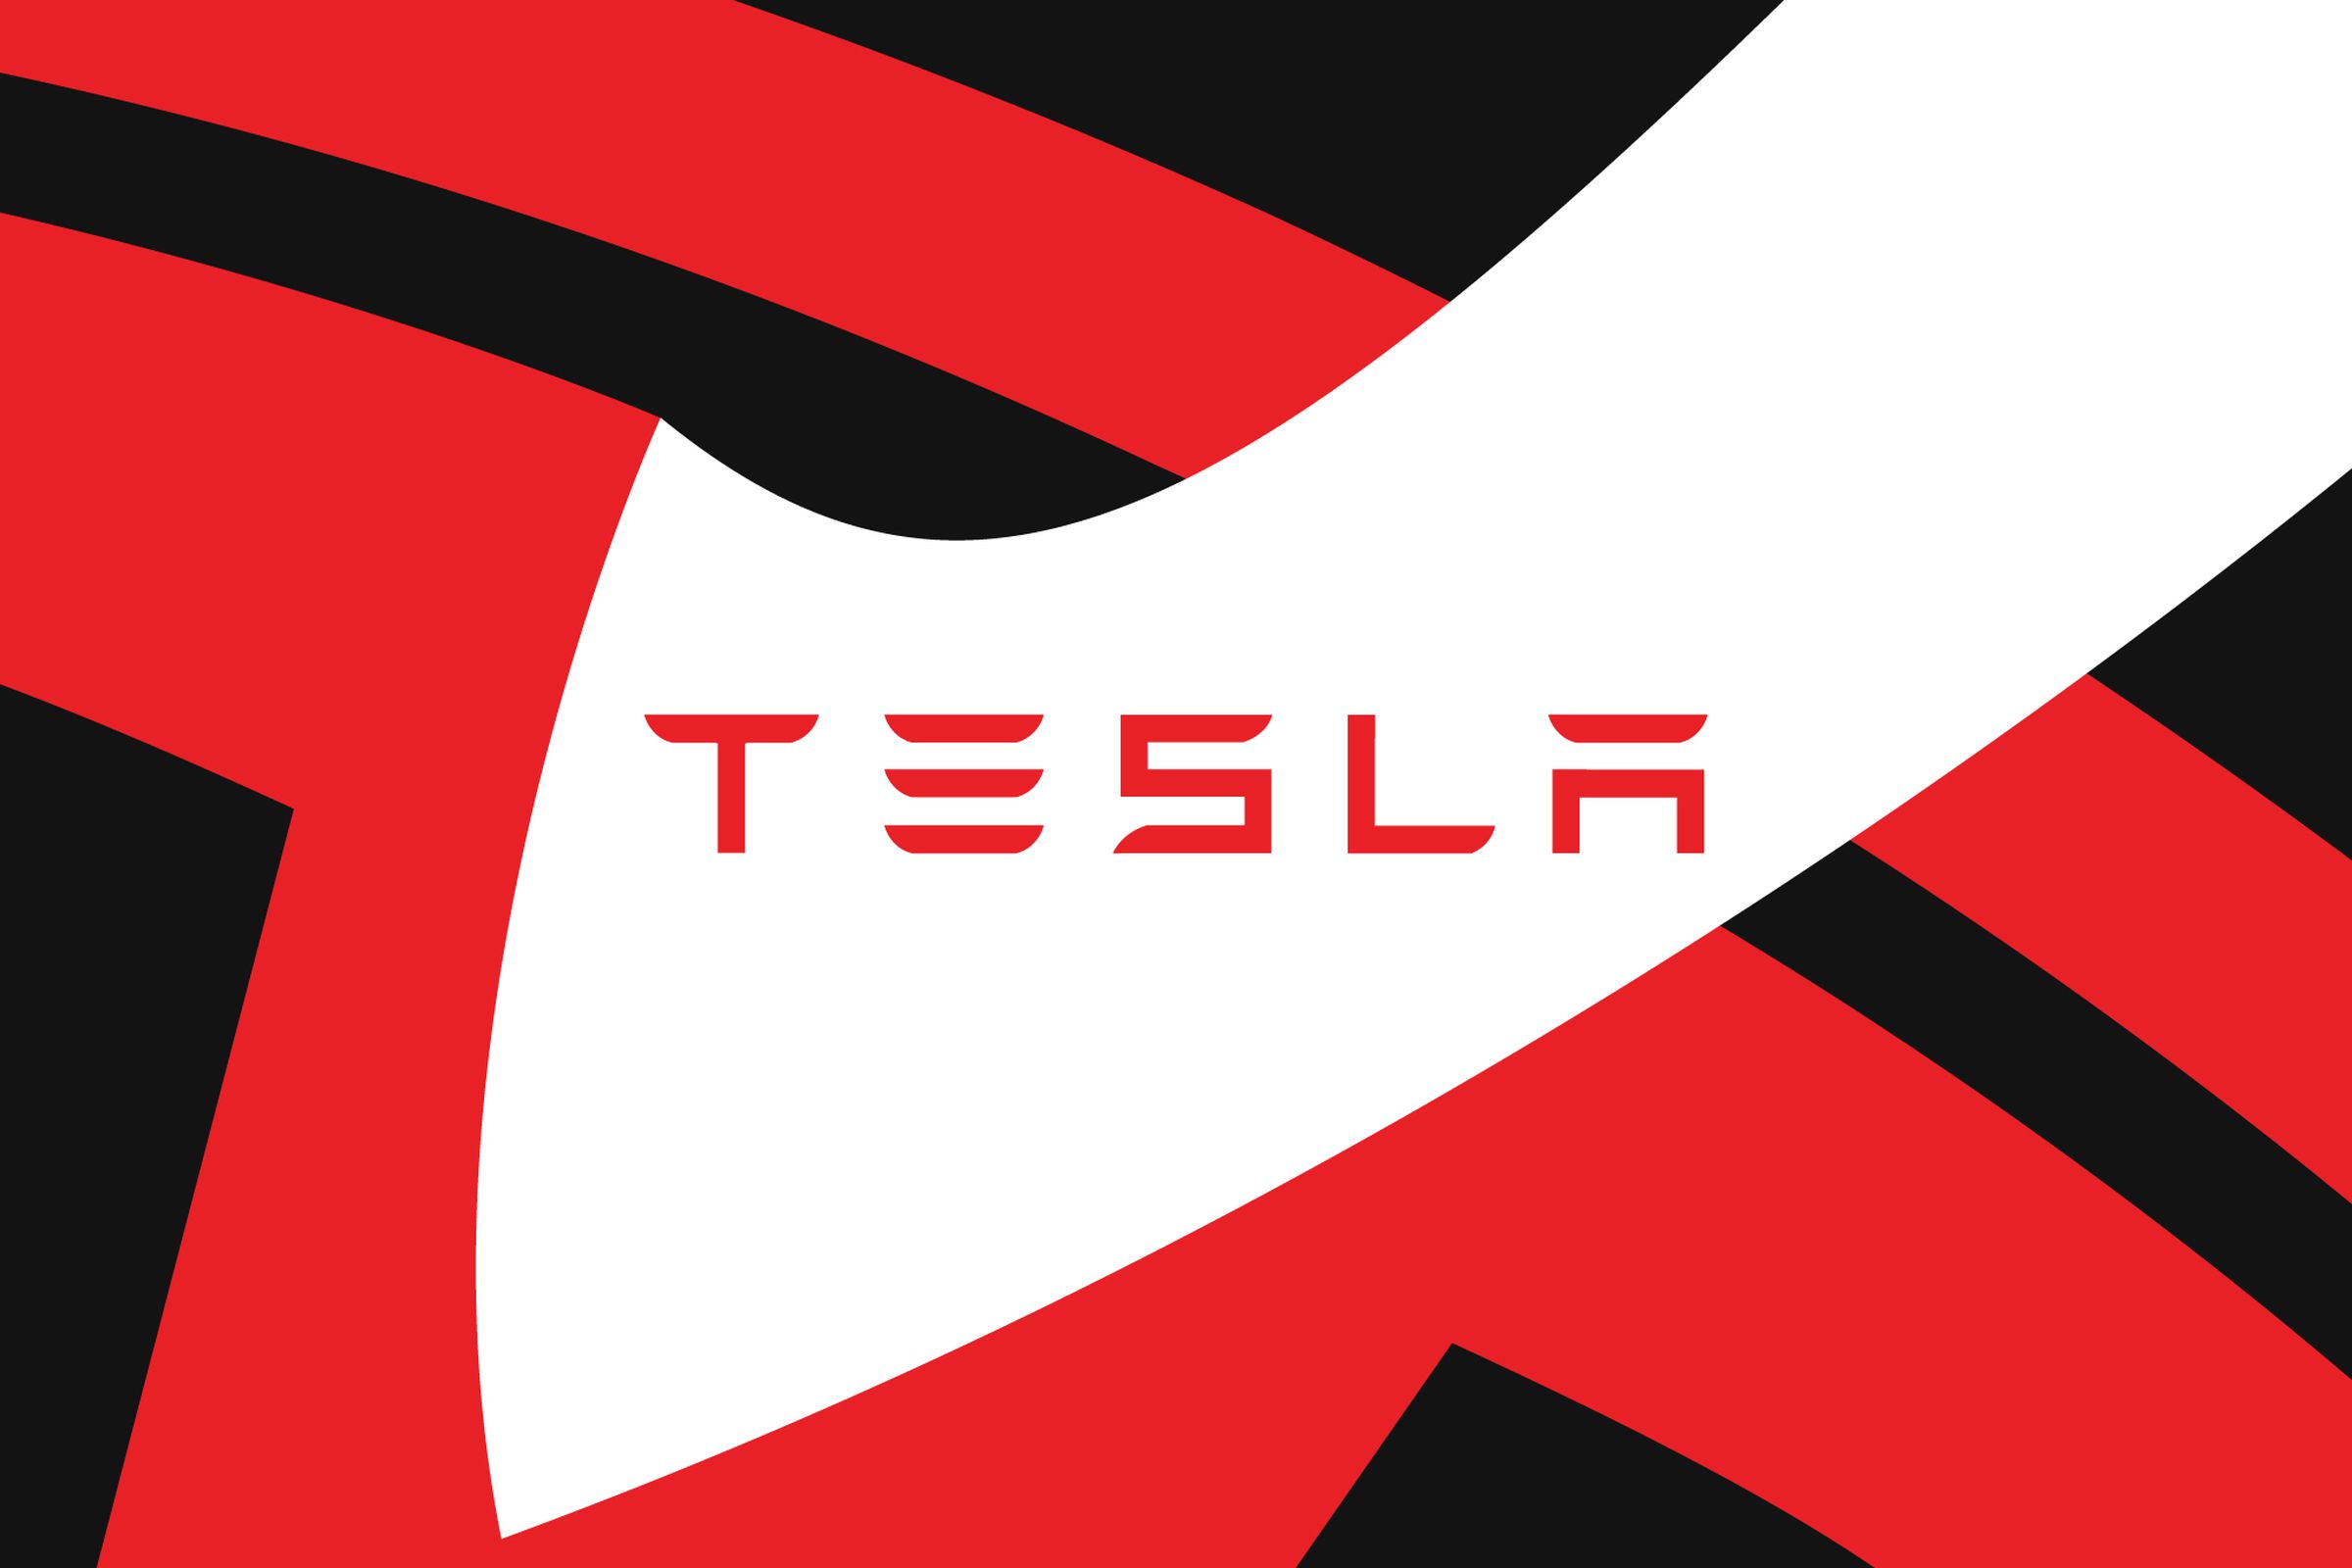 This is a stock image of the Tesla logo spelled out in red with a white shape forming around it and a tilted and zoomed red Tesla T logo behind it.